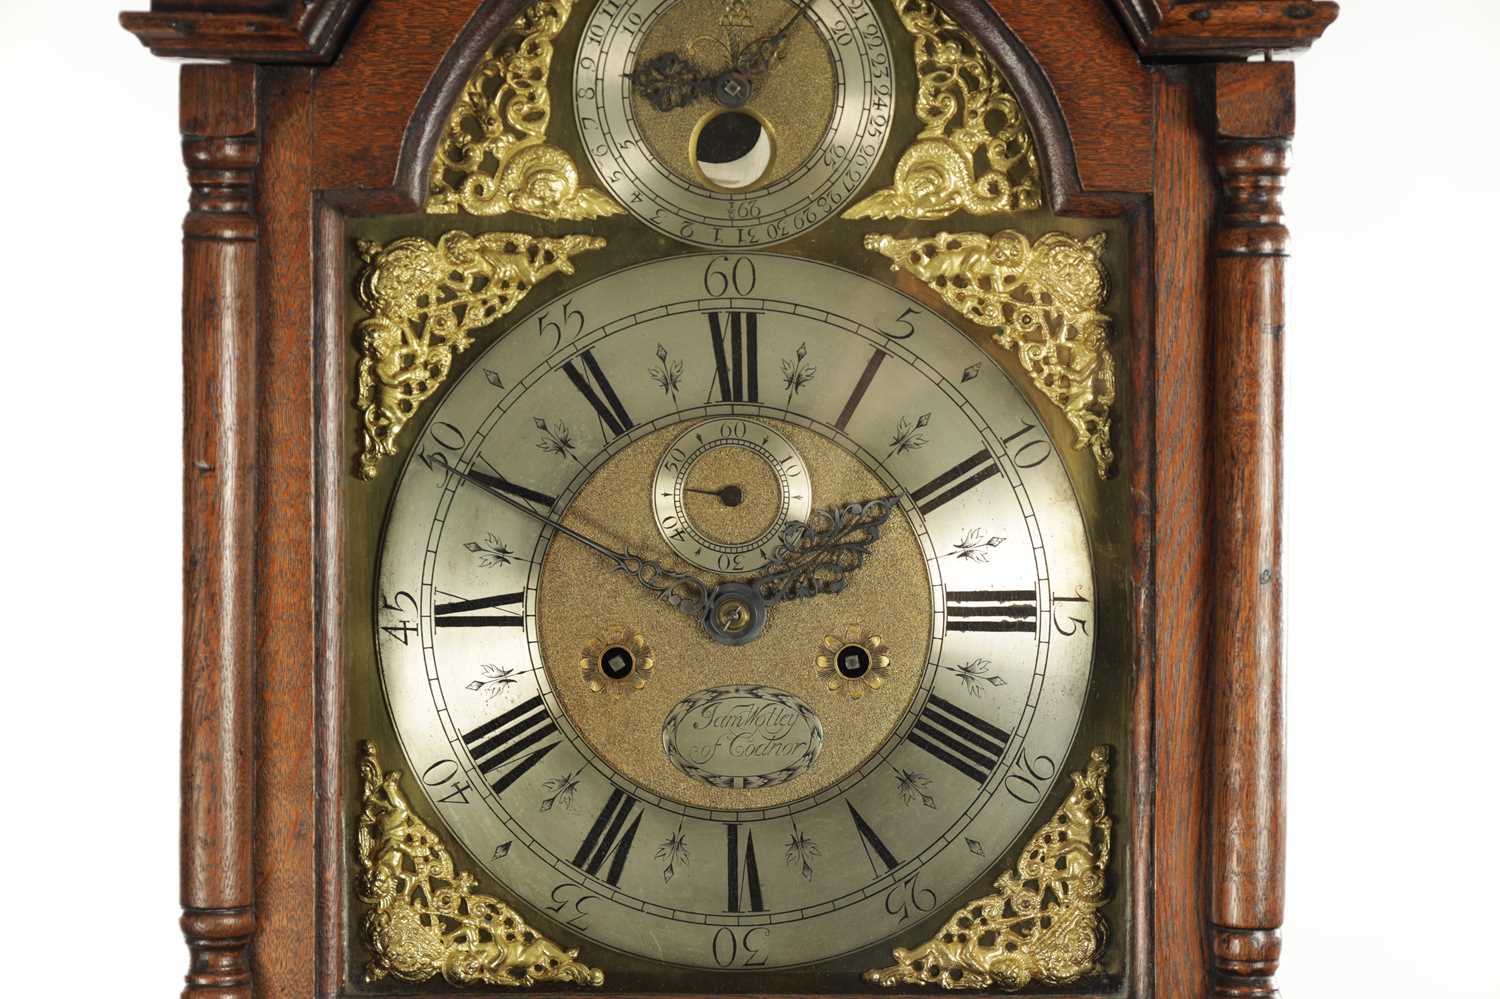 JAMES WOLLEY (WOOLLEY), CODNOR. AN EARLY 18TH CENTURY EIGHT DAY LONGCASE CLOCK WITH MOONPHASE - Image 2 of 14